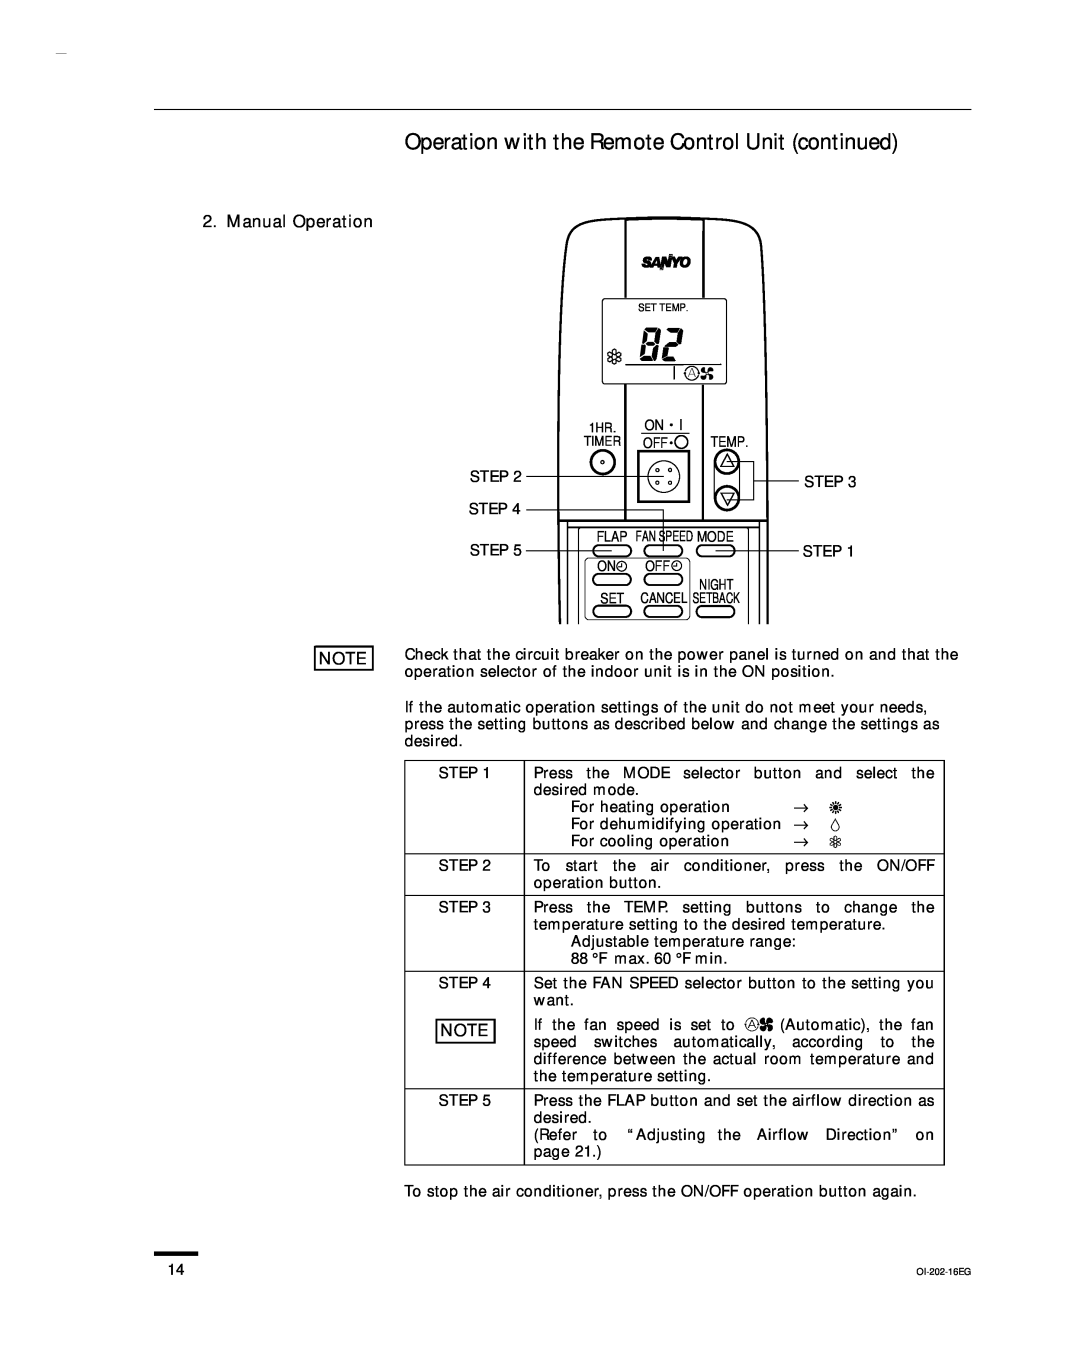 Sanyo CH0952, CH1852, KHS1852-S service manual Operation with the Remote Control Unit continued, Manual Operation 